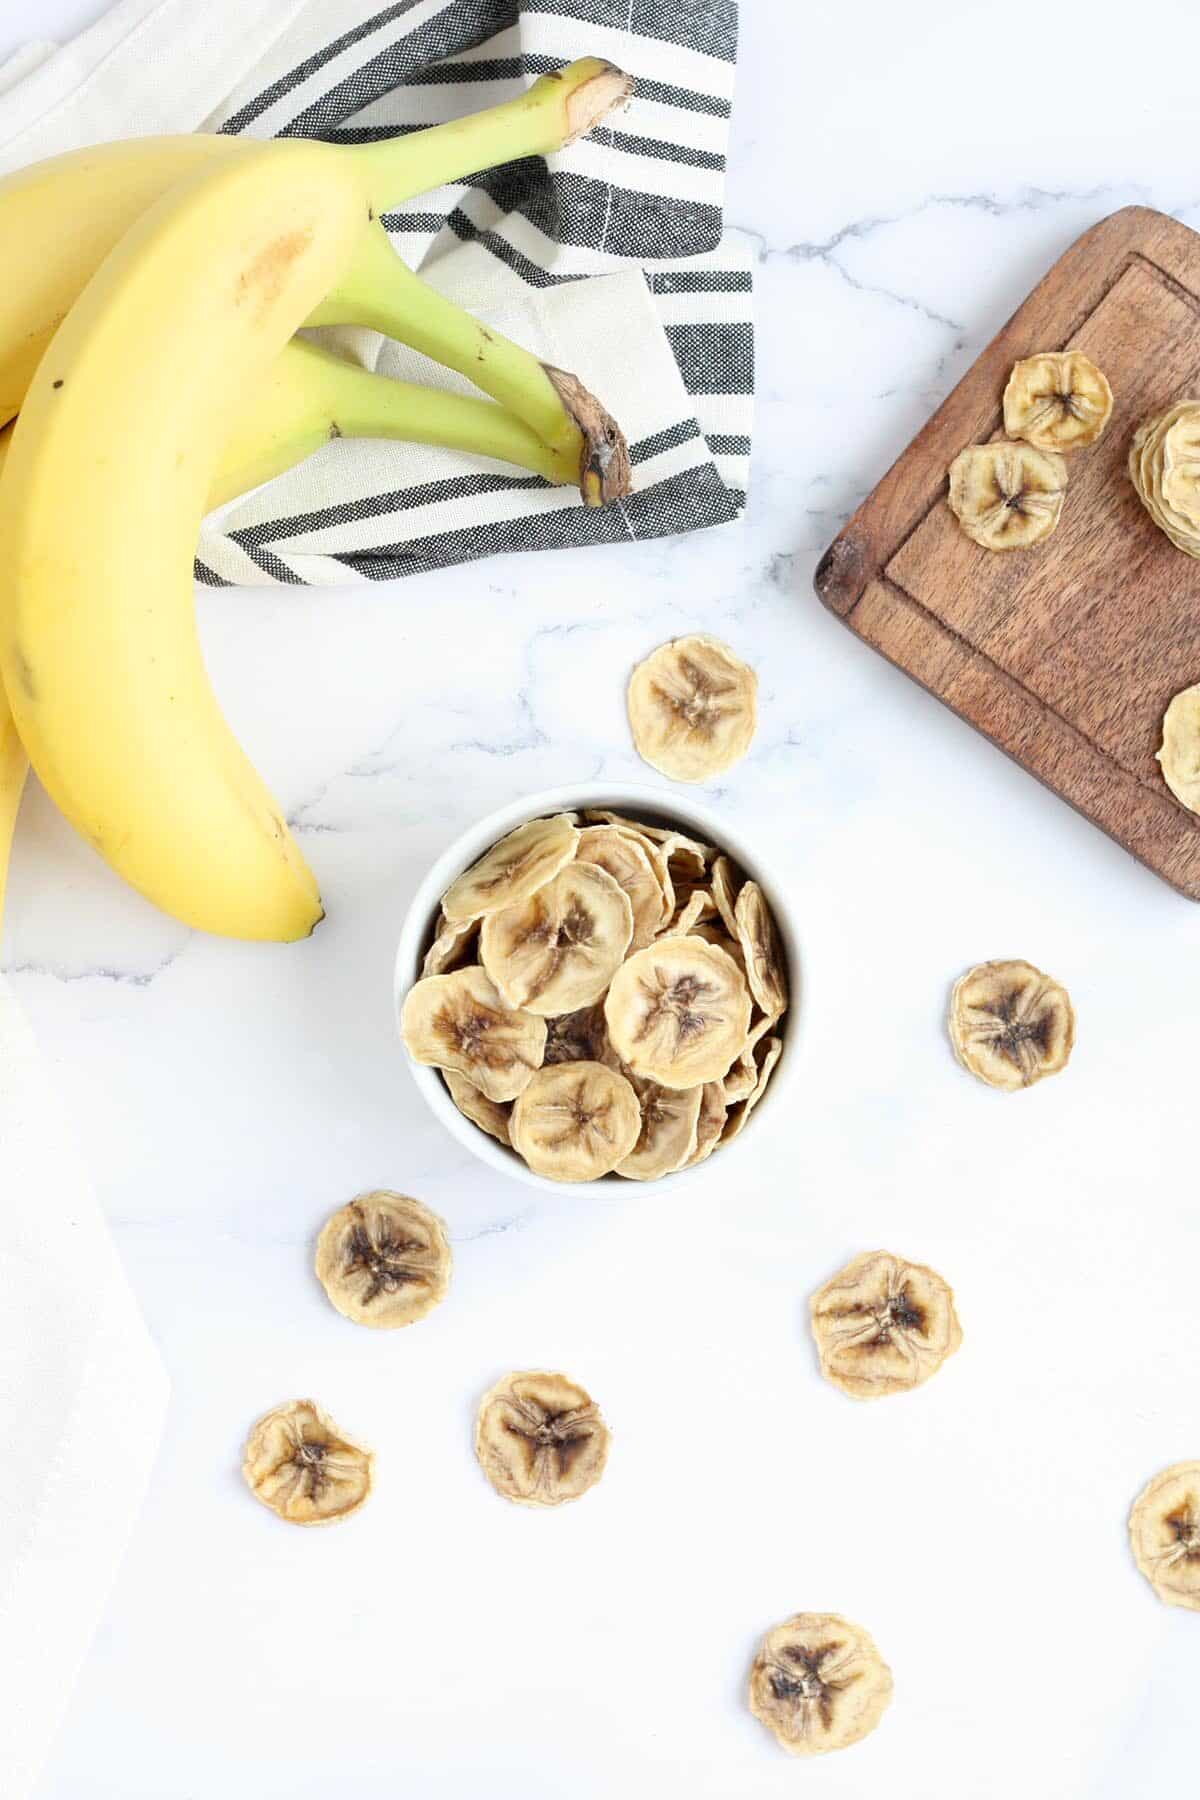 Top view of homemade banana chip on a marble surface, fresh bananas and wooden cutting board in the background
